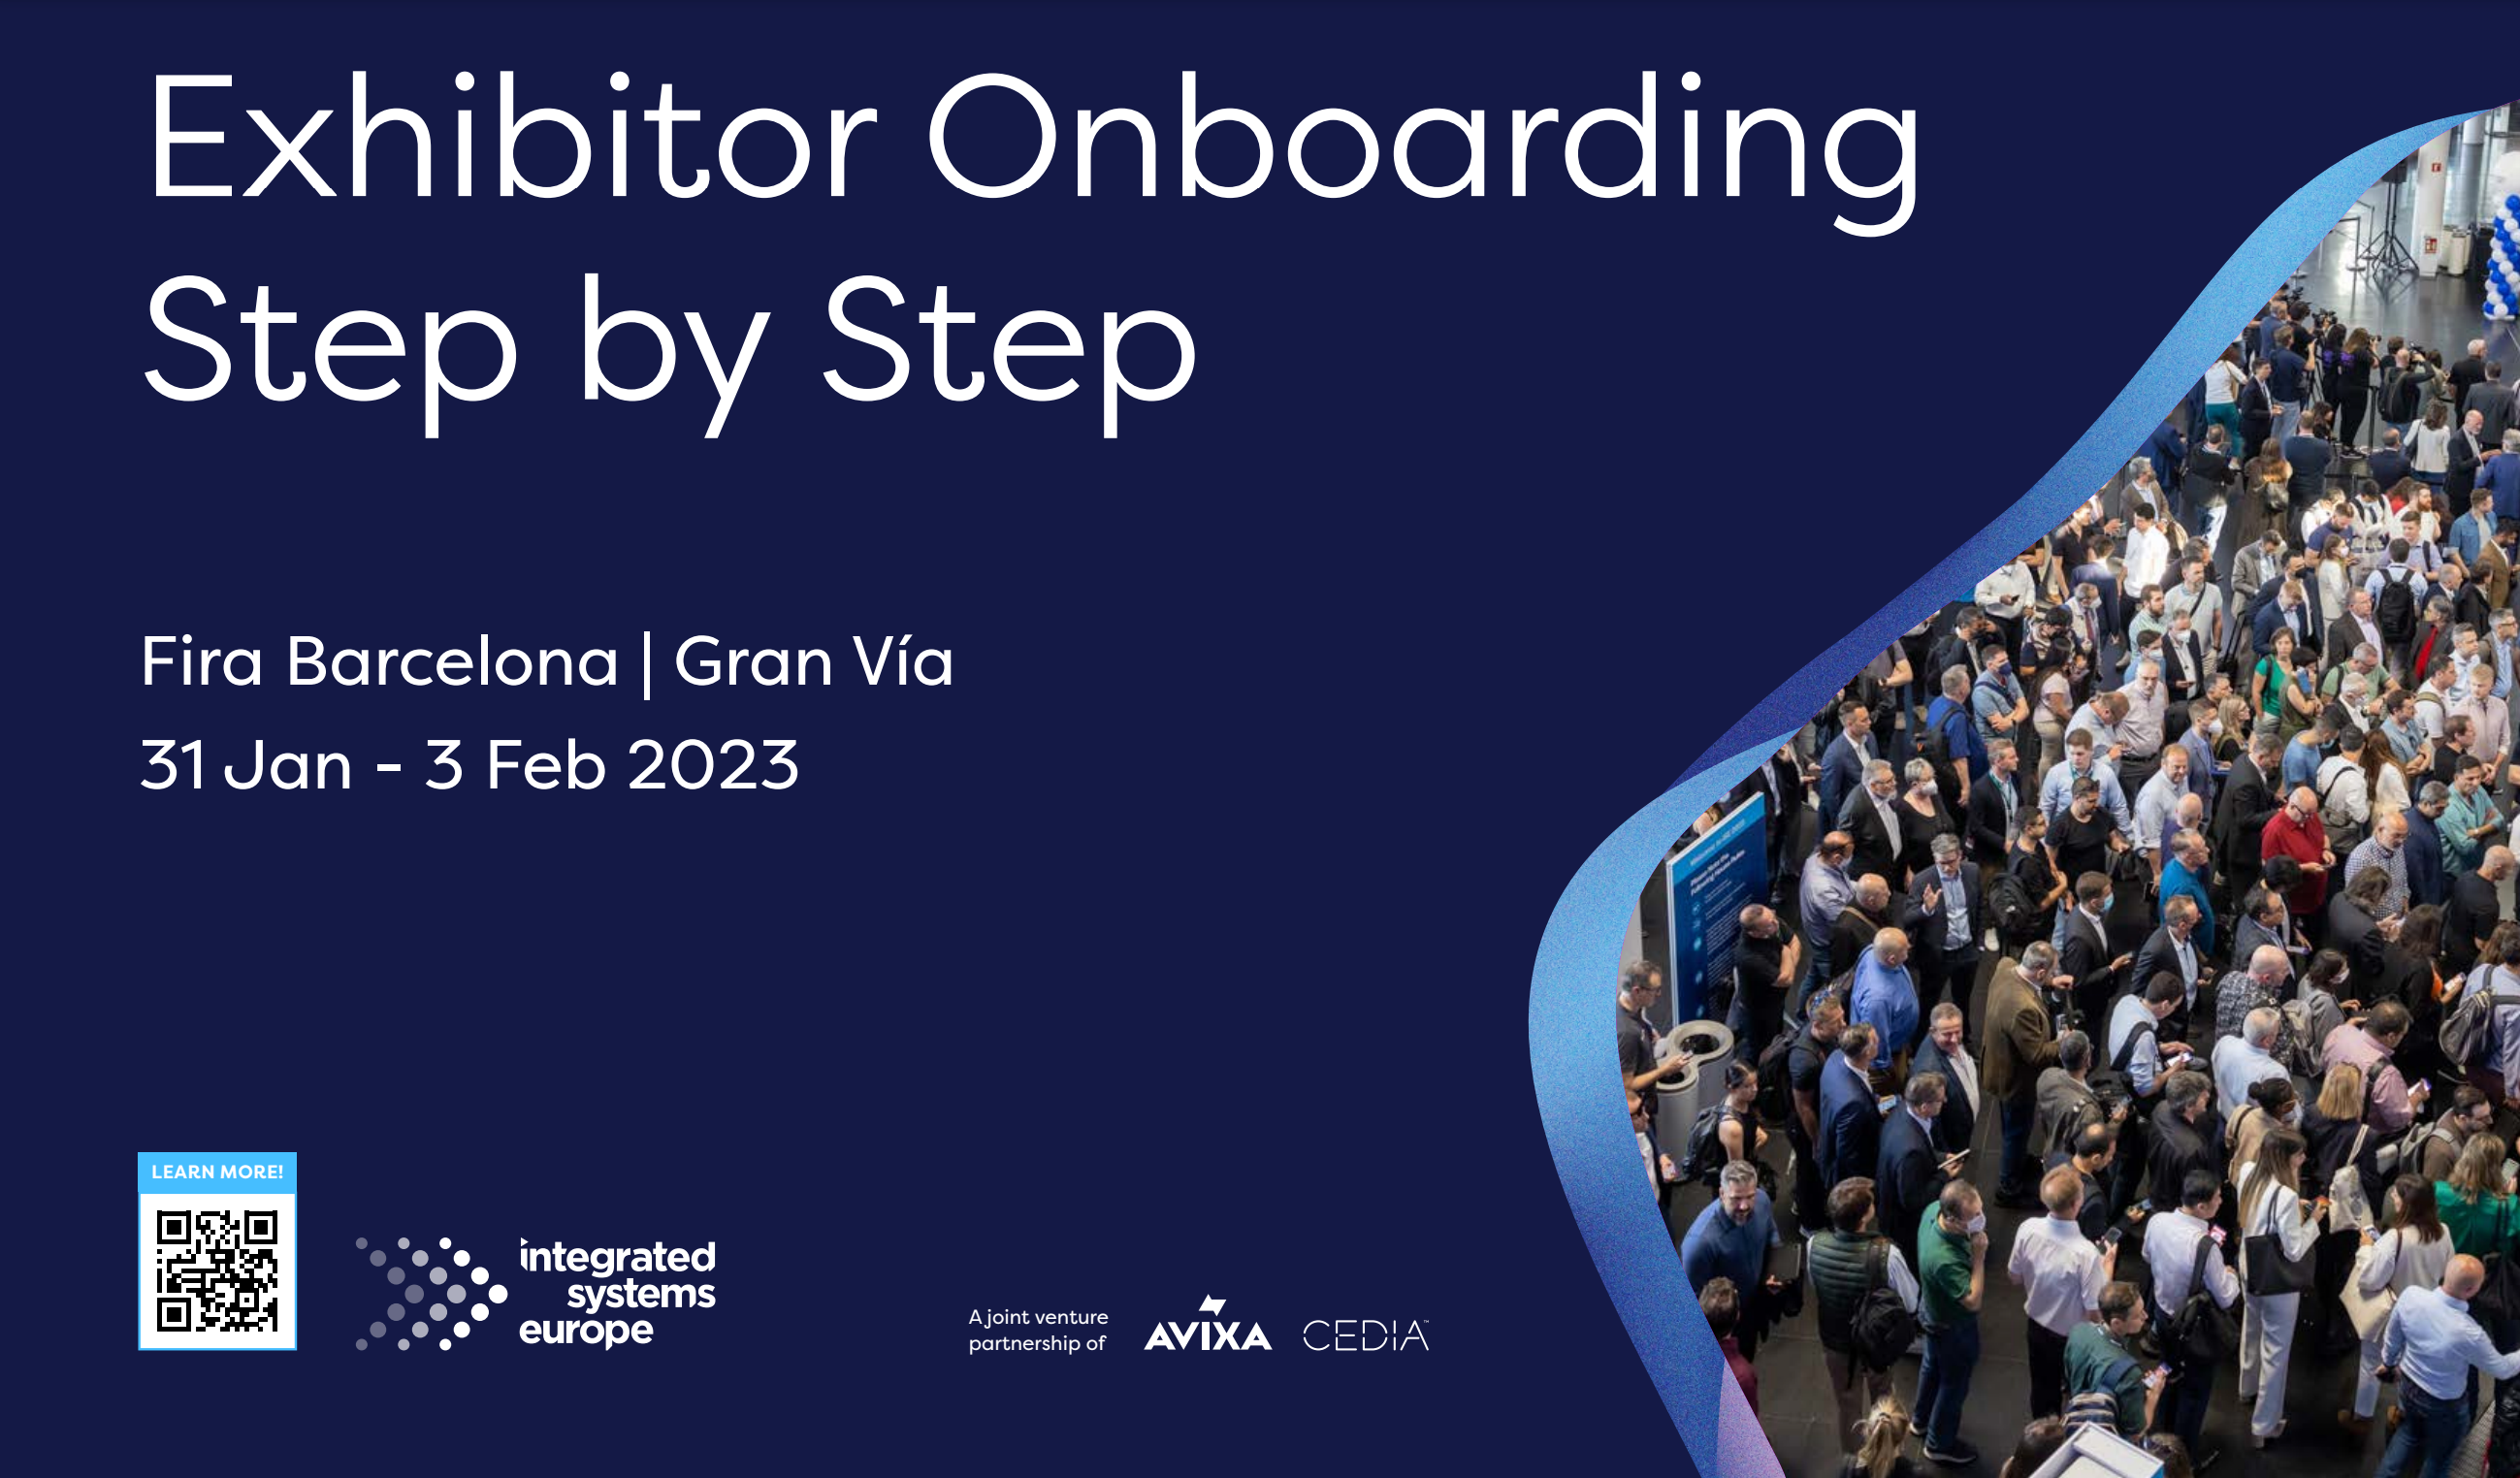 Exhibitor Onboarding Step-by-Step